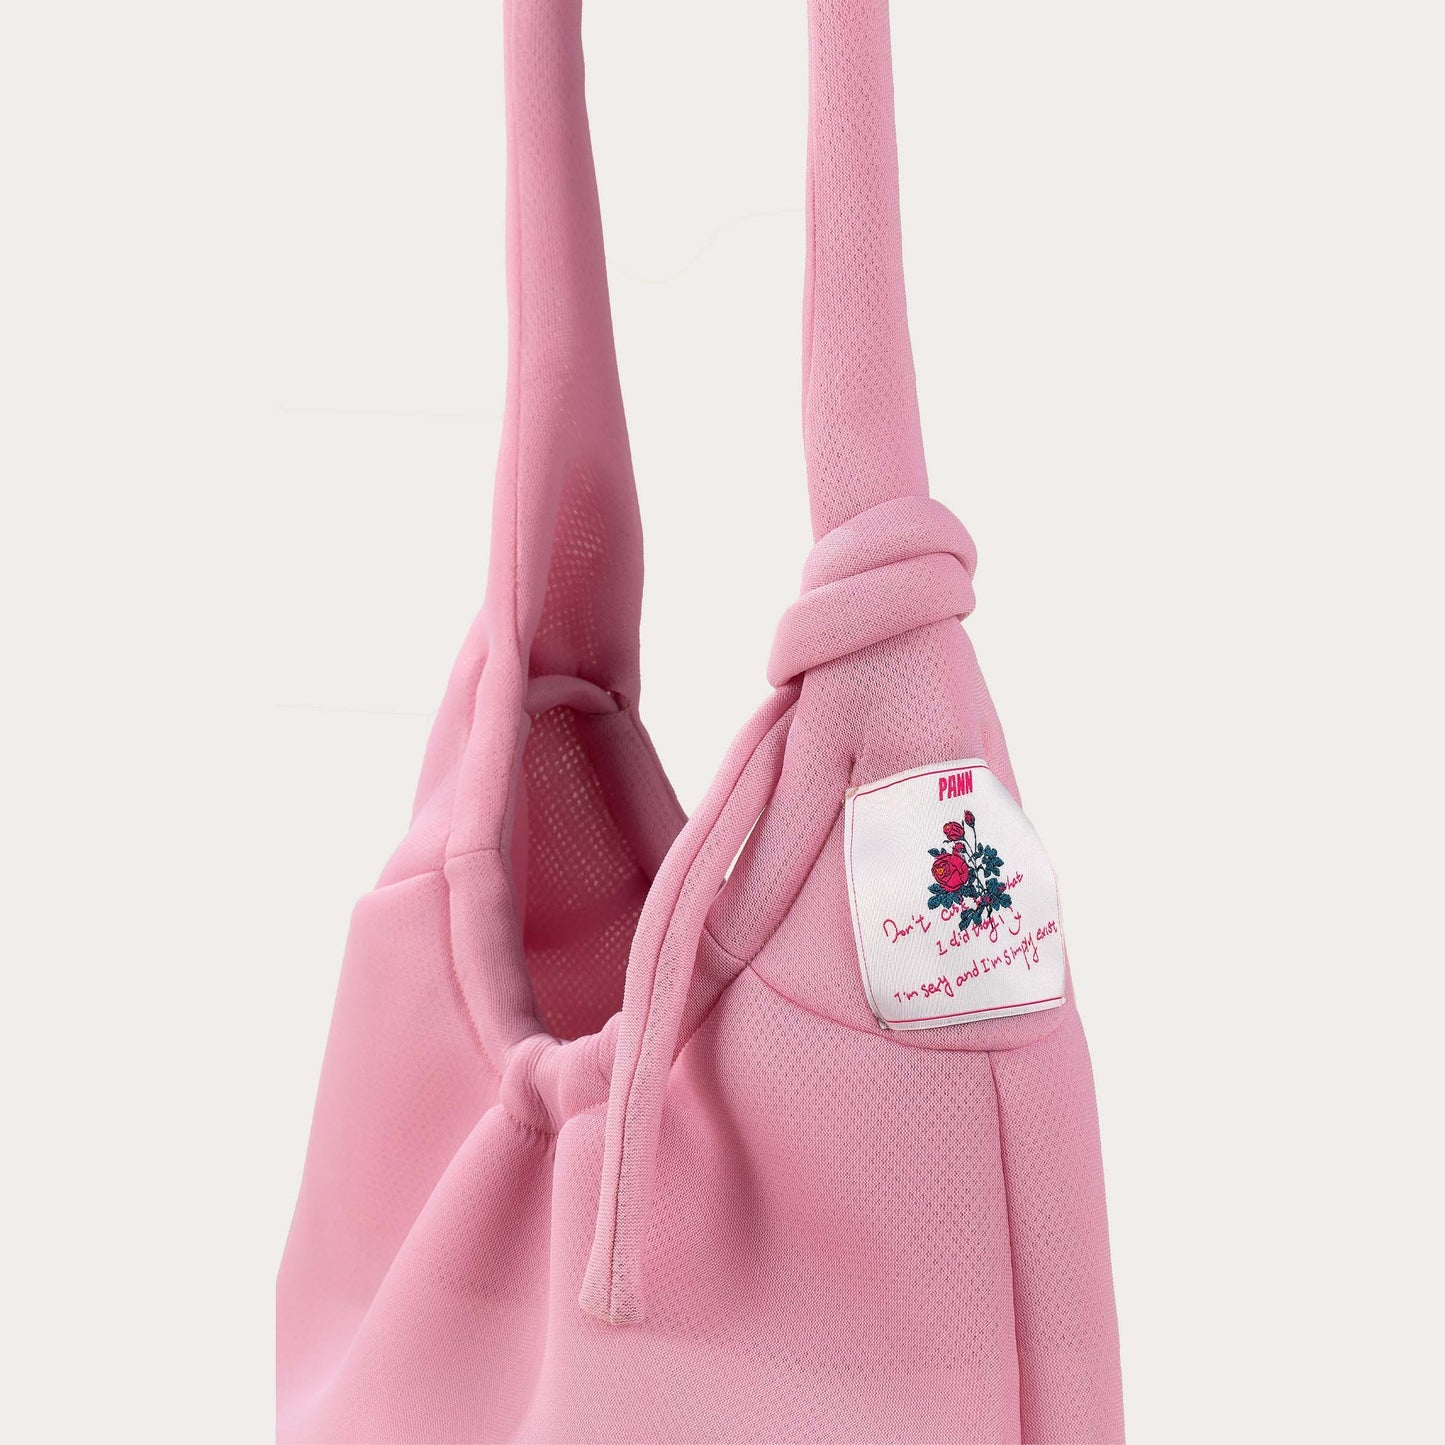 Everyday Carry Bag Large in Dusty Pink